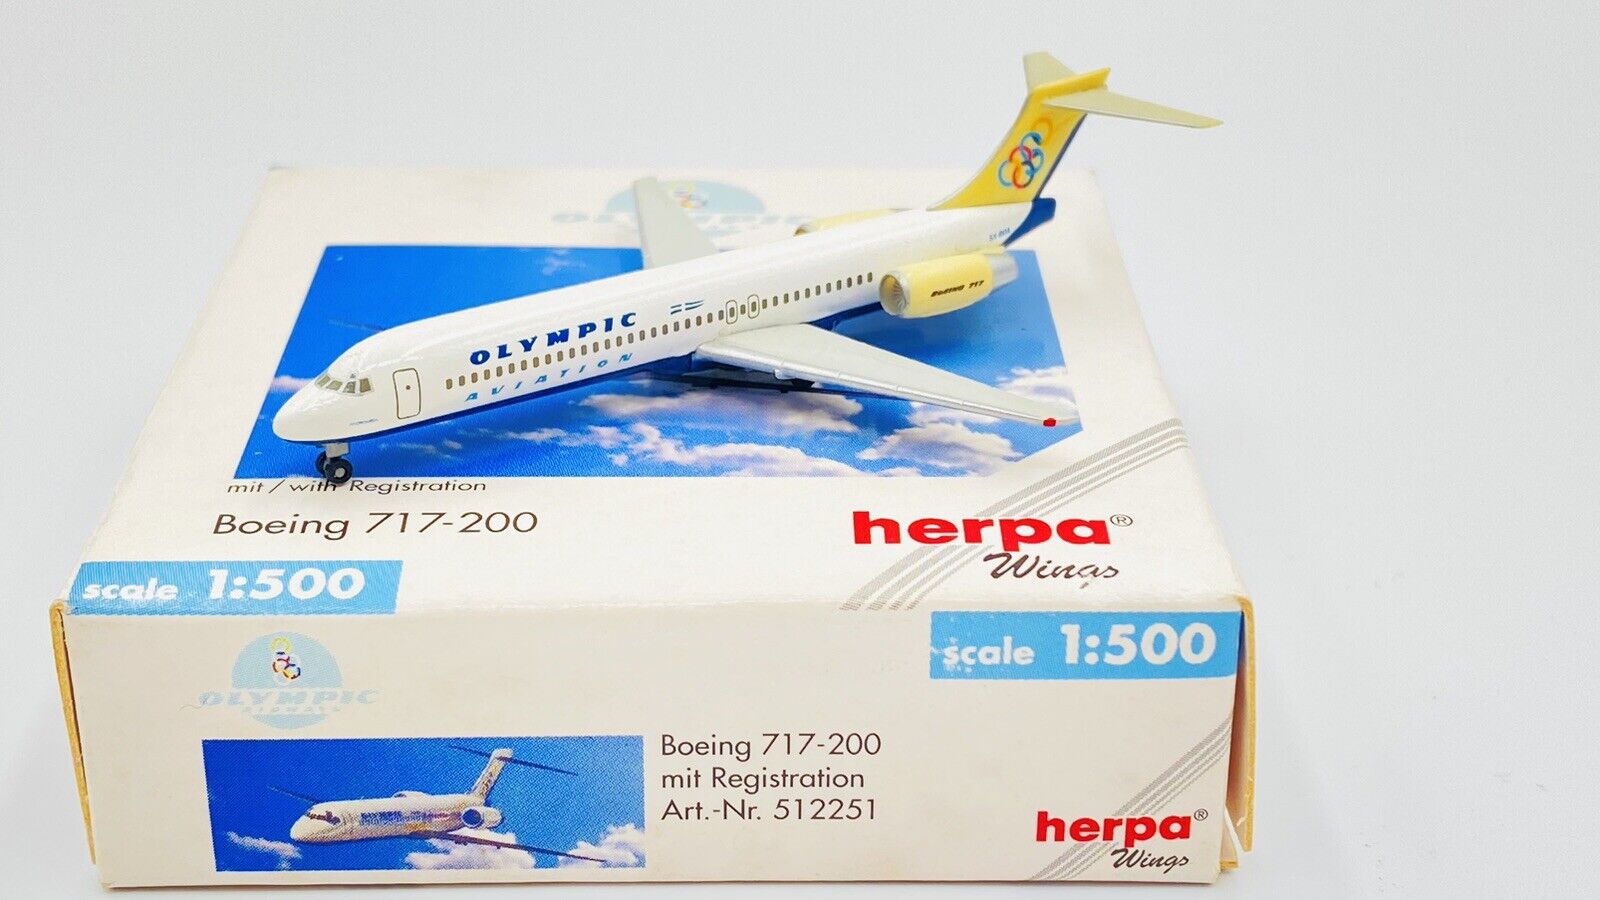 HERPA WINGS (512251) 1:500 OLYMPIC AVIATION BOEING 717-200 BOXED 